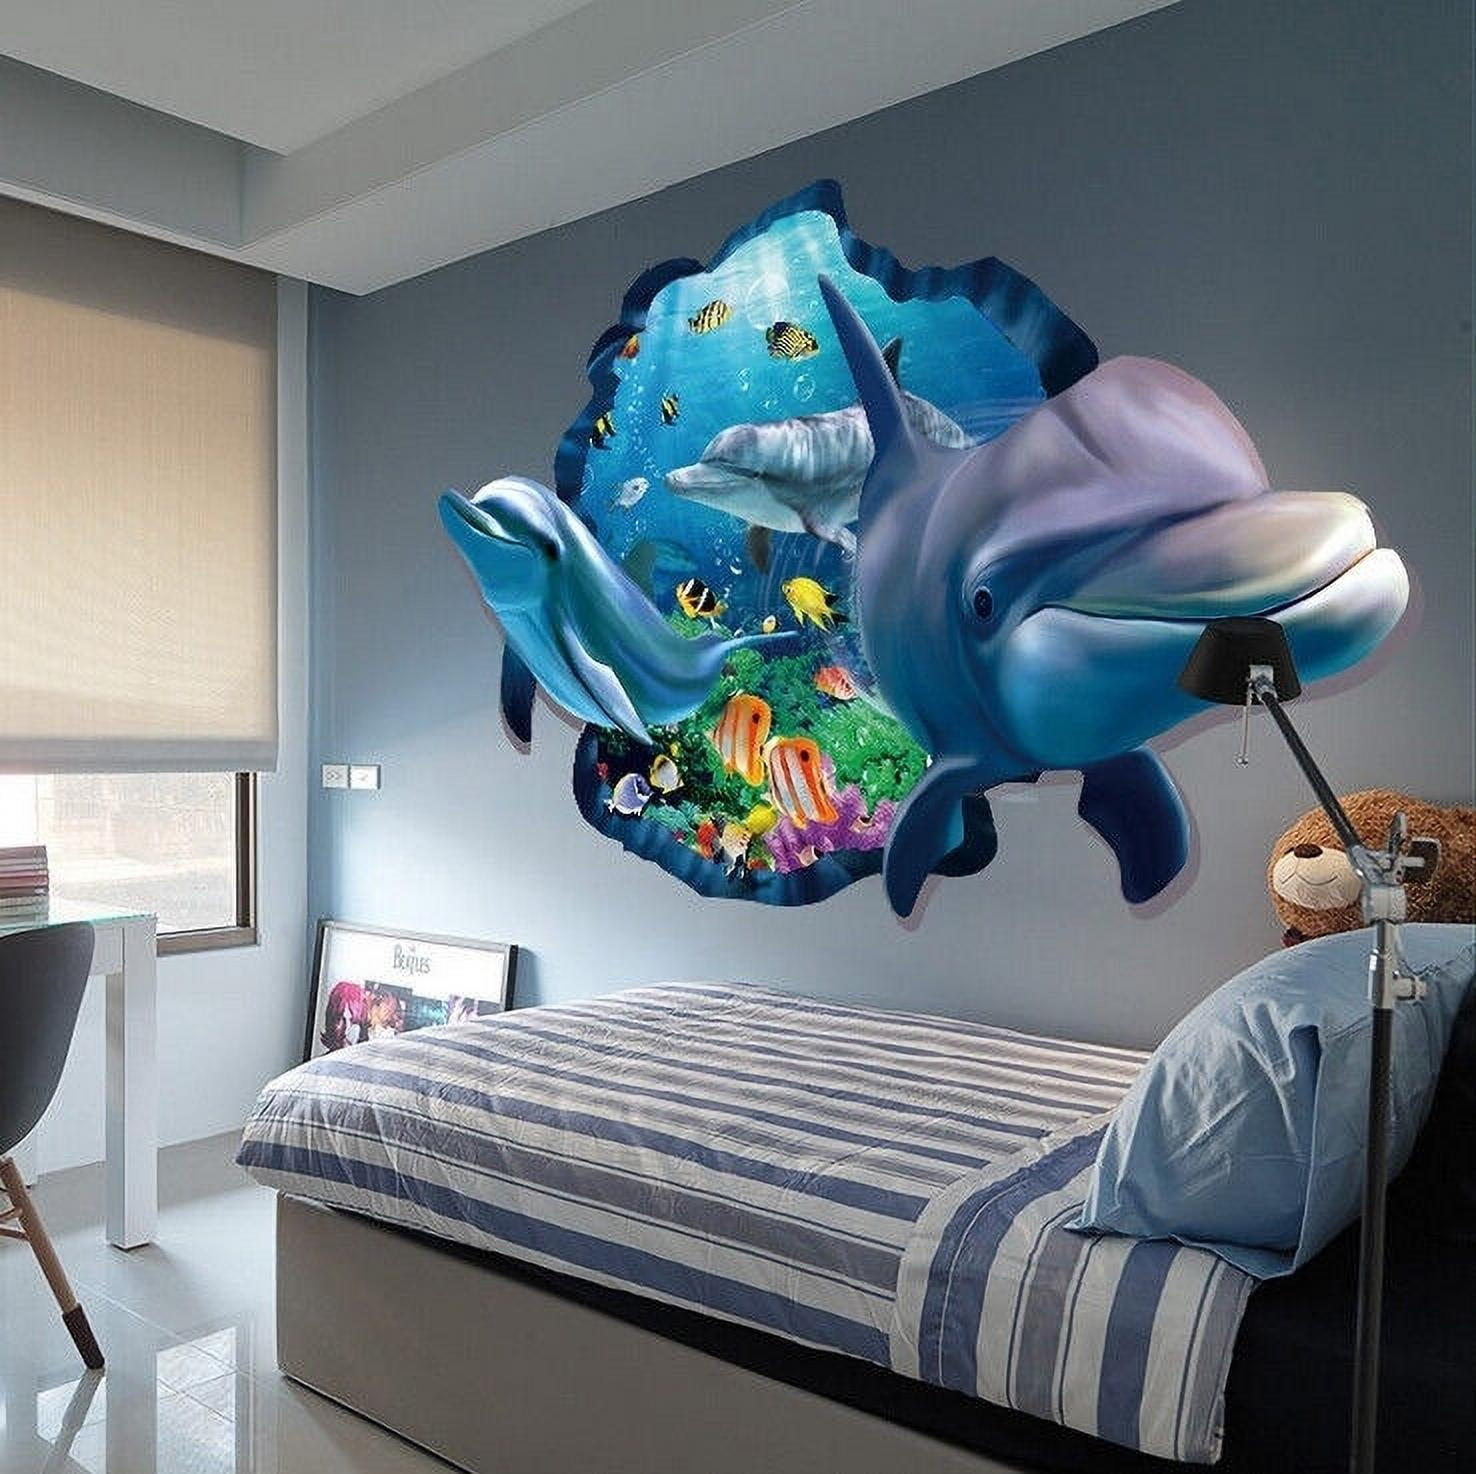 show original title Details about   3D ROOM WITH SEAVIEW B616 Wall Sticker Wall Decal Wallpaper Mural Amy 